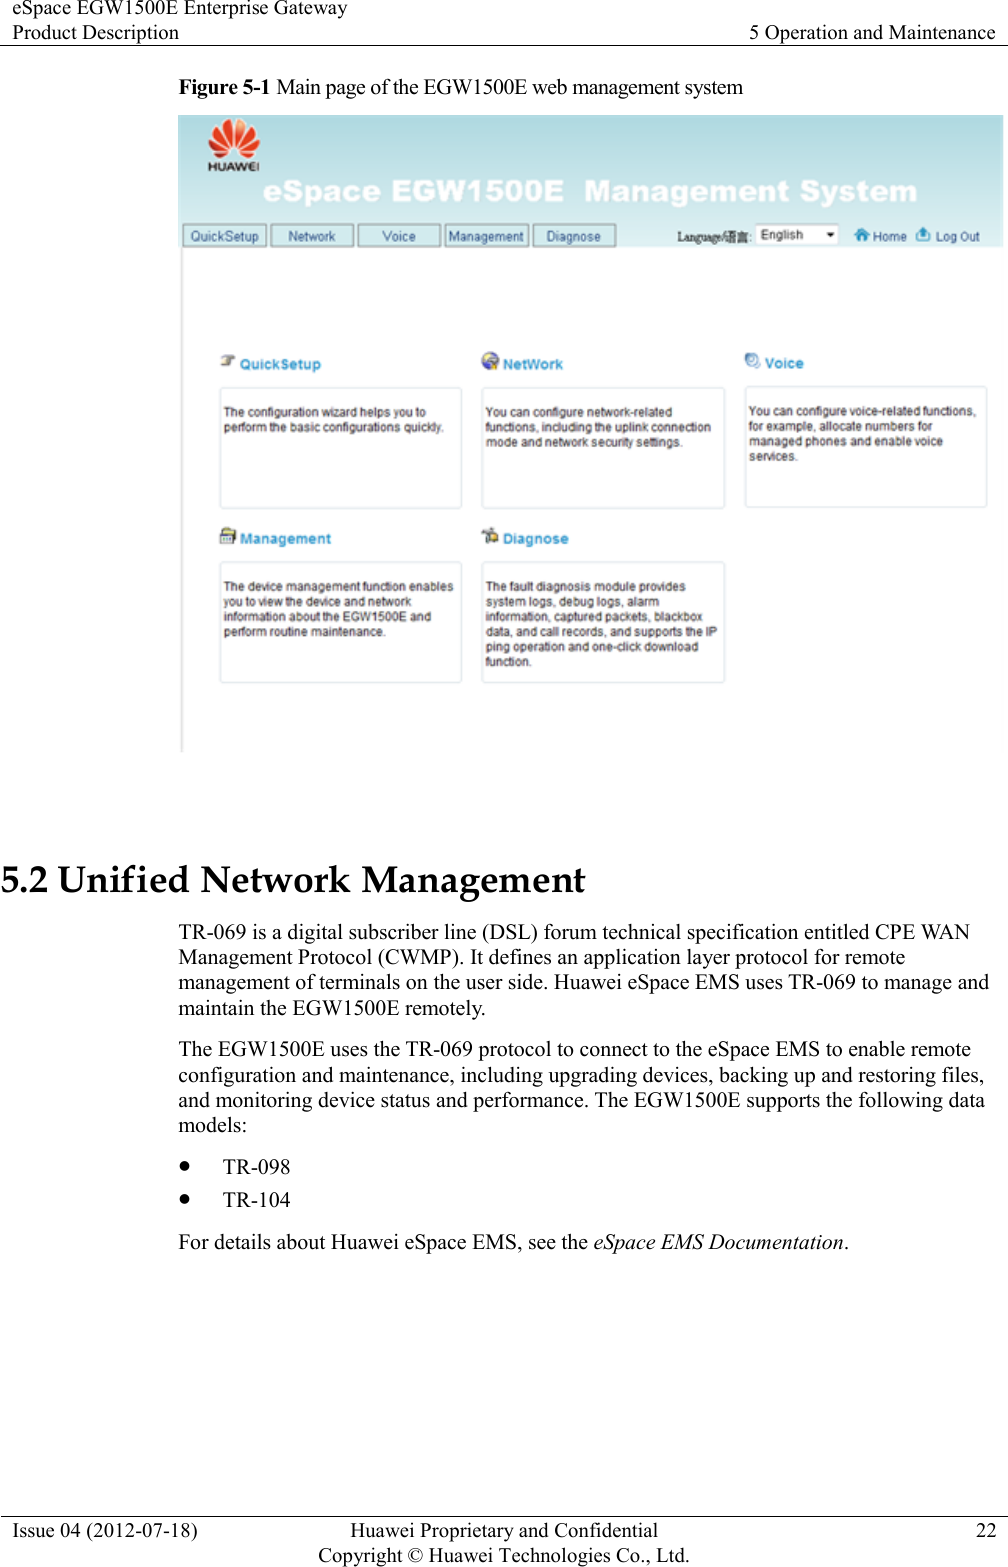 eSpace EGW1500E Enterprise Gateway Product Description 5 Operation and Maintenance  Issue 04 (2012-07-18) Huawei Proprietary and Confidential                                     Copyright © Huawei Technologies Co., Ltd. 22  Figure 5-1 Main page of the EGW1500E web management system   5.2 Unified Network Management TR-069 is a digital subscriber line (DSL) forum technical specification entitled CPE WAN Management Protocol (CWMP). It defines an application layer protocol for remote management of terminals on the user side. Huawei eSpace EMS uses TR-069 to manage and maintain the EGW1500E remotely. The EGW1500E uses the TR-069 protocol to connect to the eSpace EMS to enable remote configuration and maintenance, including upgrading devices, backing up and restoring files, and monitoring device status and performance. The EGW1500E supports the following data models:  TR-098  TR-104 For details about Huawei eSpace EMS, see the eSpace EMS Documentation. 